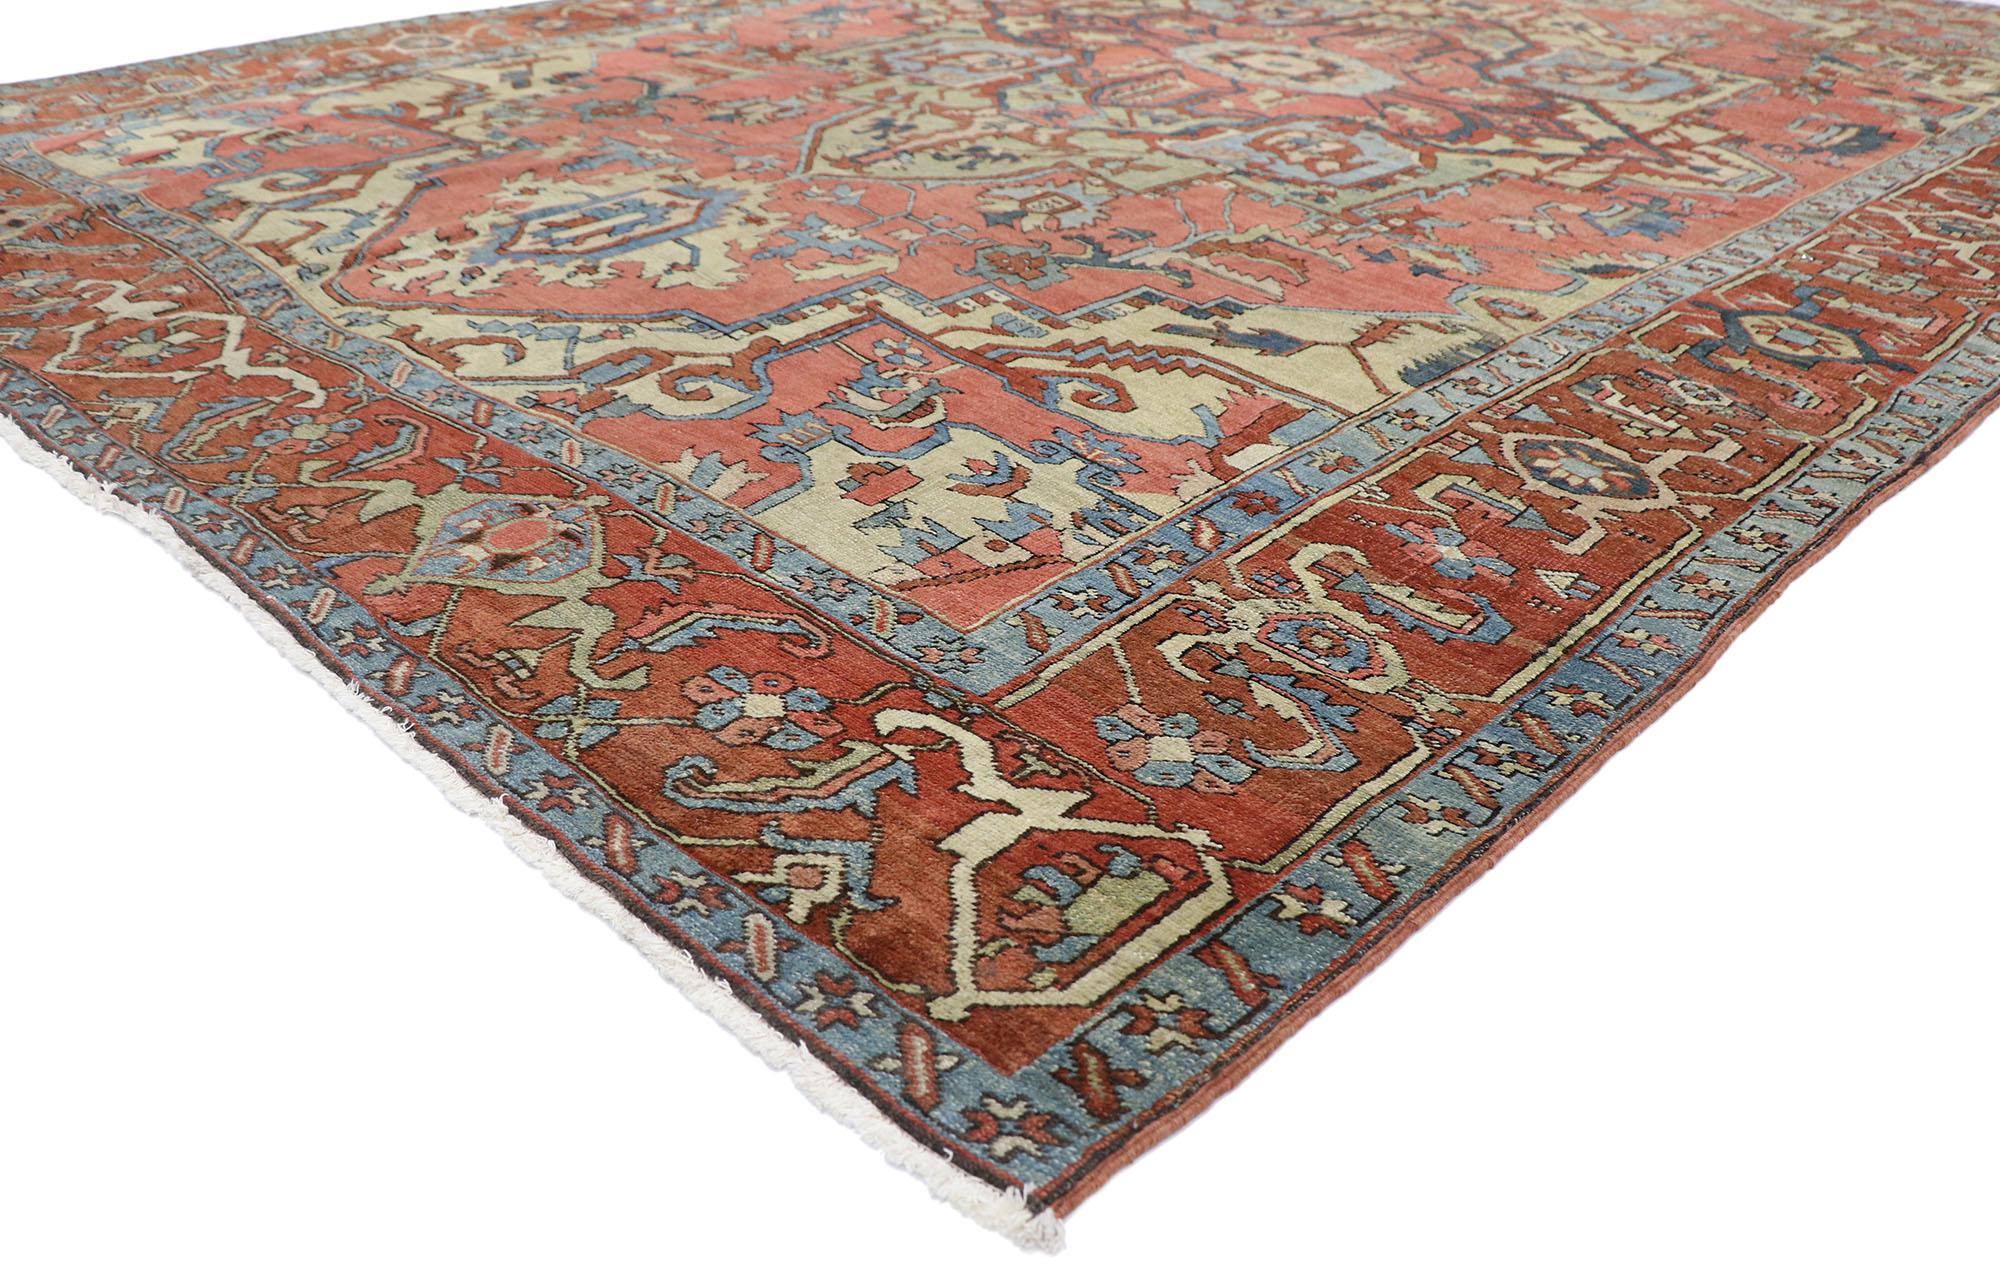 77539 Distressed Antique Persian Serapi rug with relaxed Federal Style 08'08 x 12'03. Emanating exquisite grace and architectural design elements with a lovingly time-worn composition, this hand knotted wool antique Persian Serapi rug can